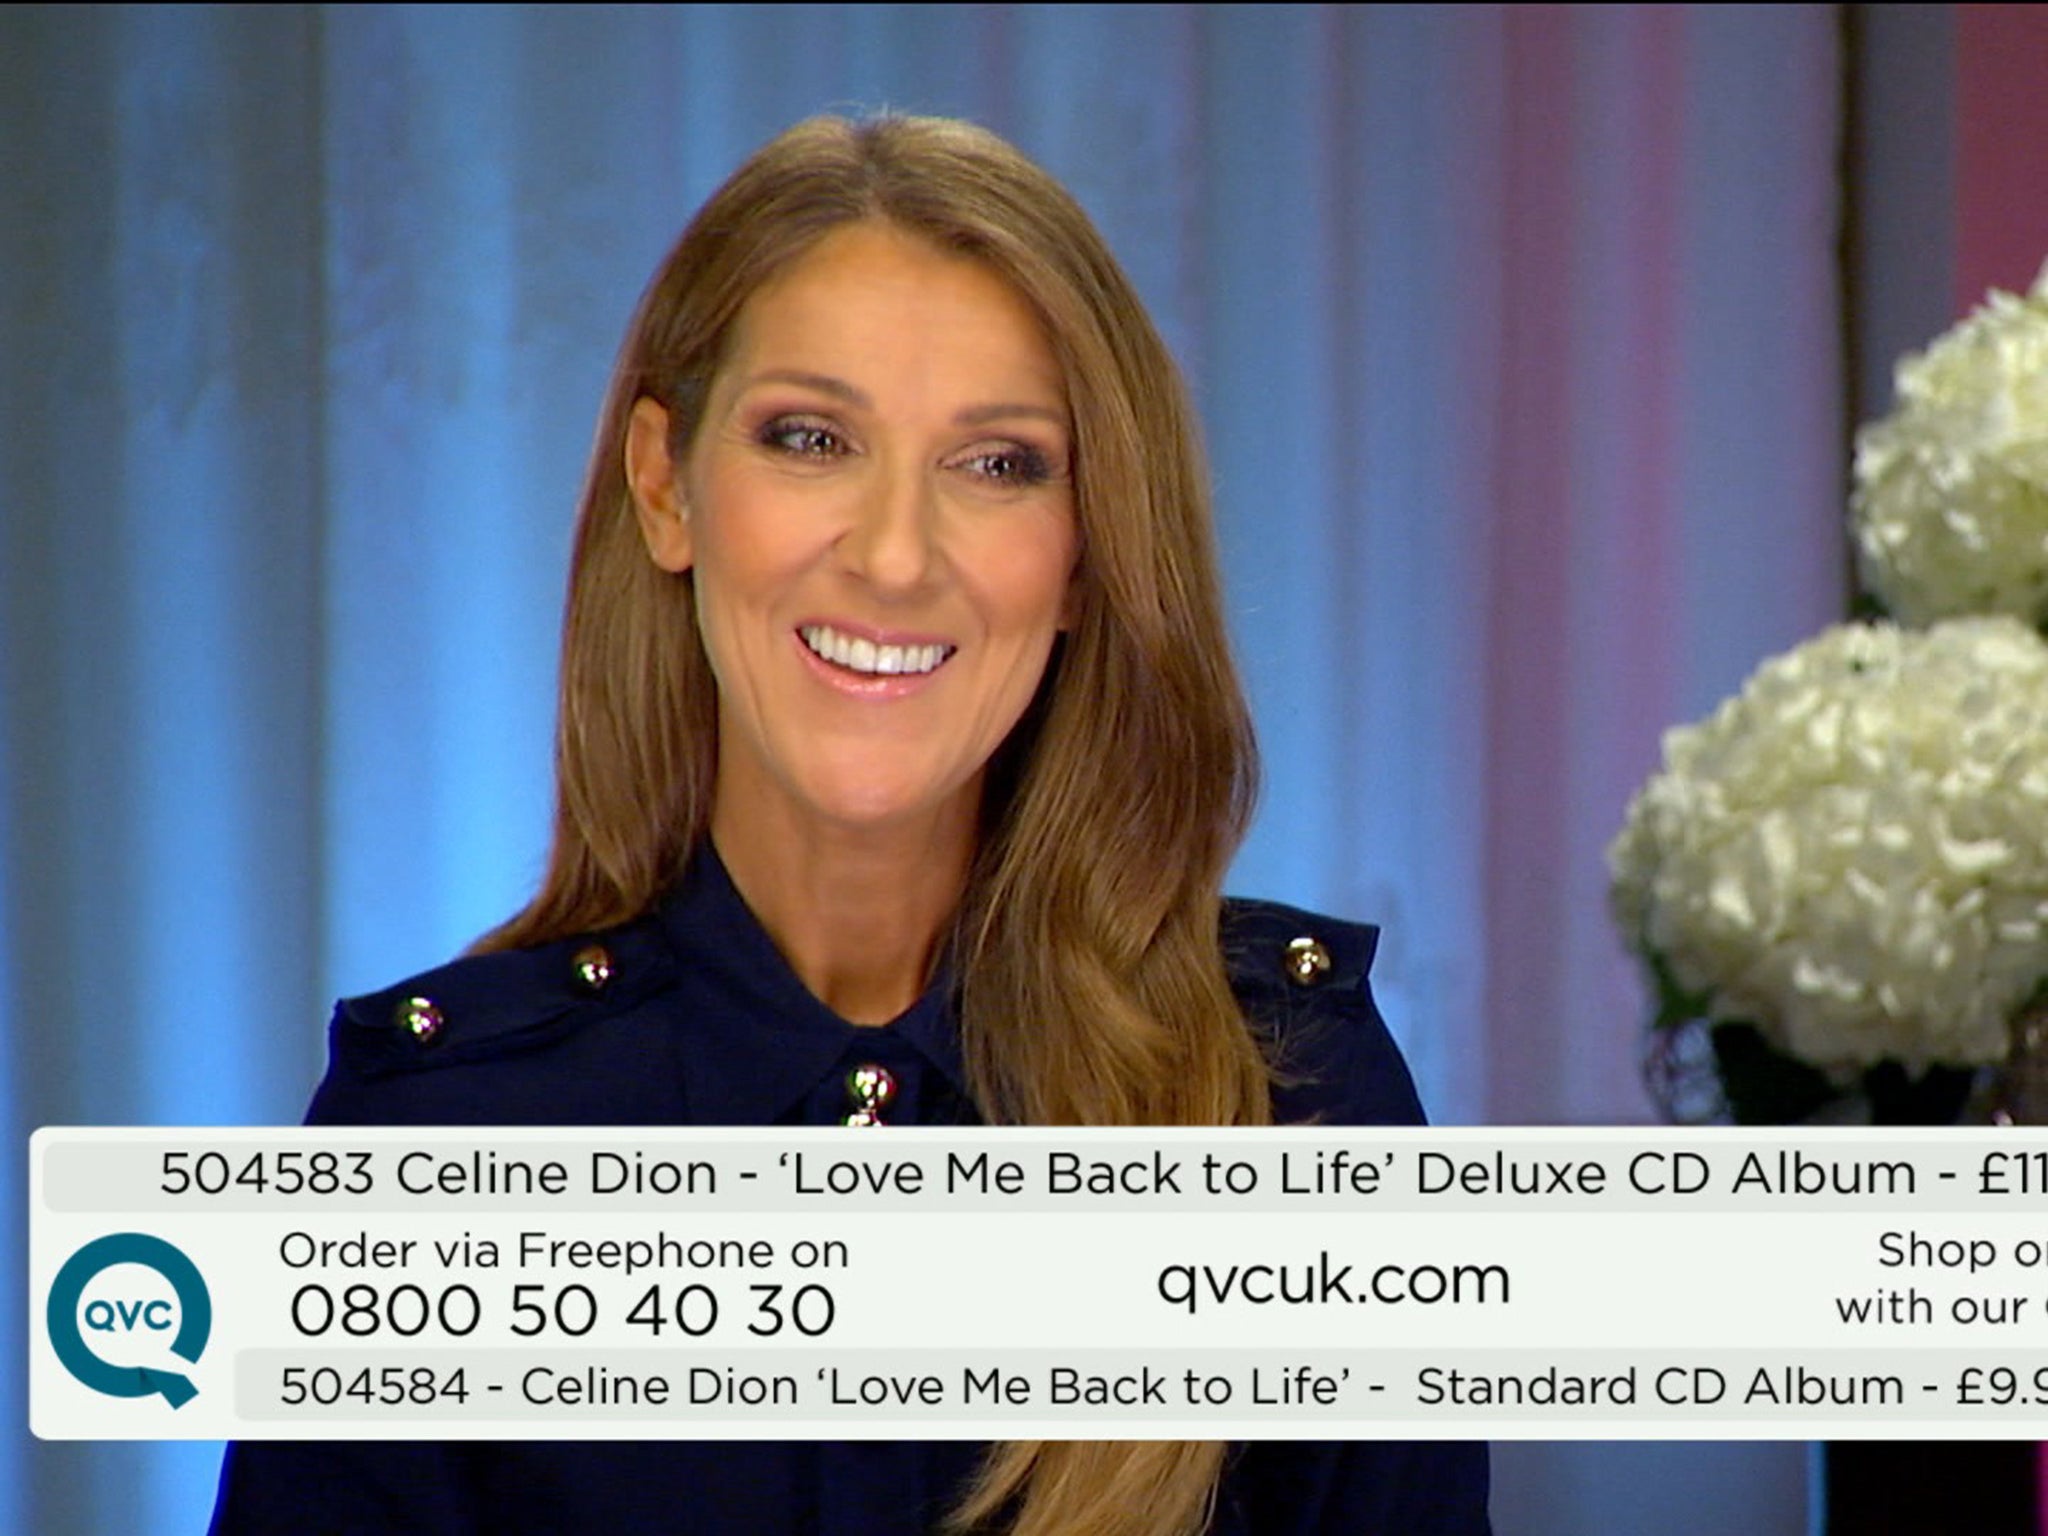 Celine Dion appears on QVC to promote her album